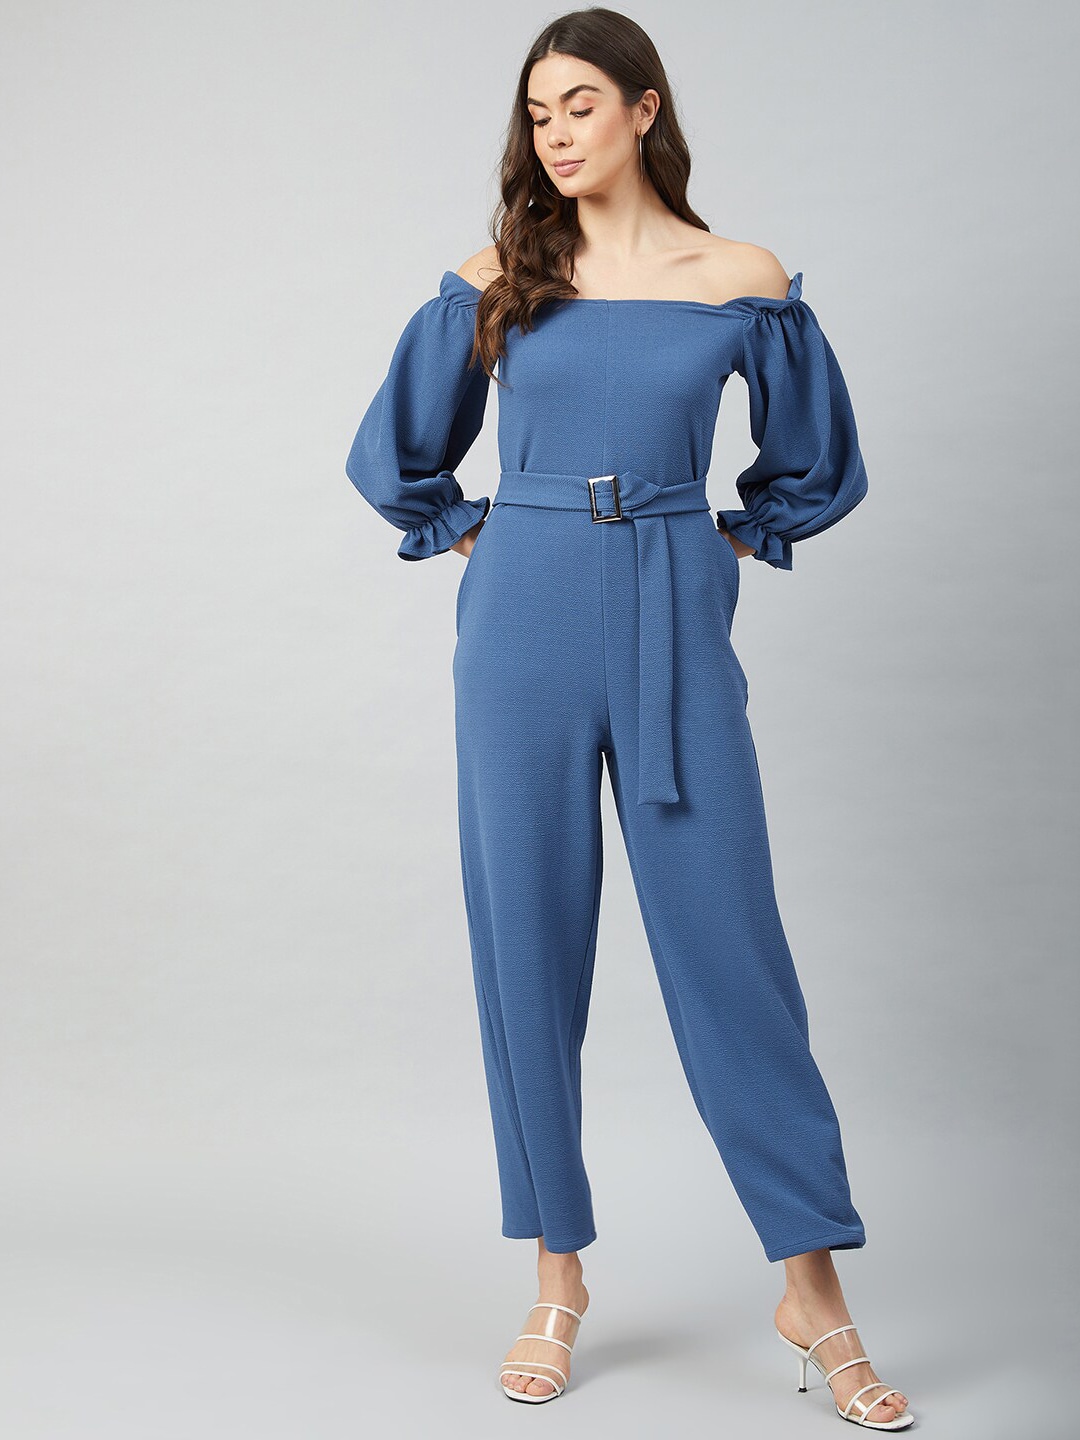 Athena Women Blue Solid Jumpsuit Price in India